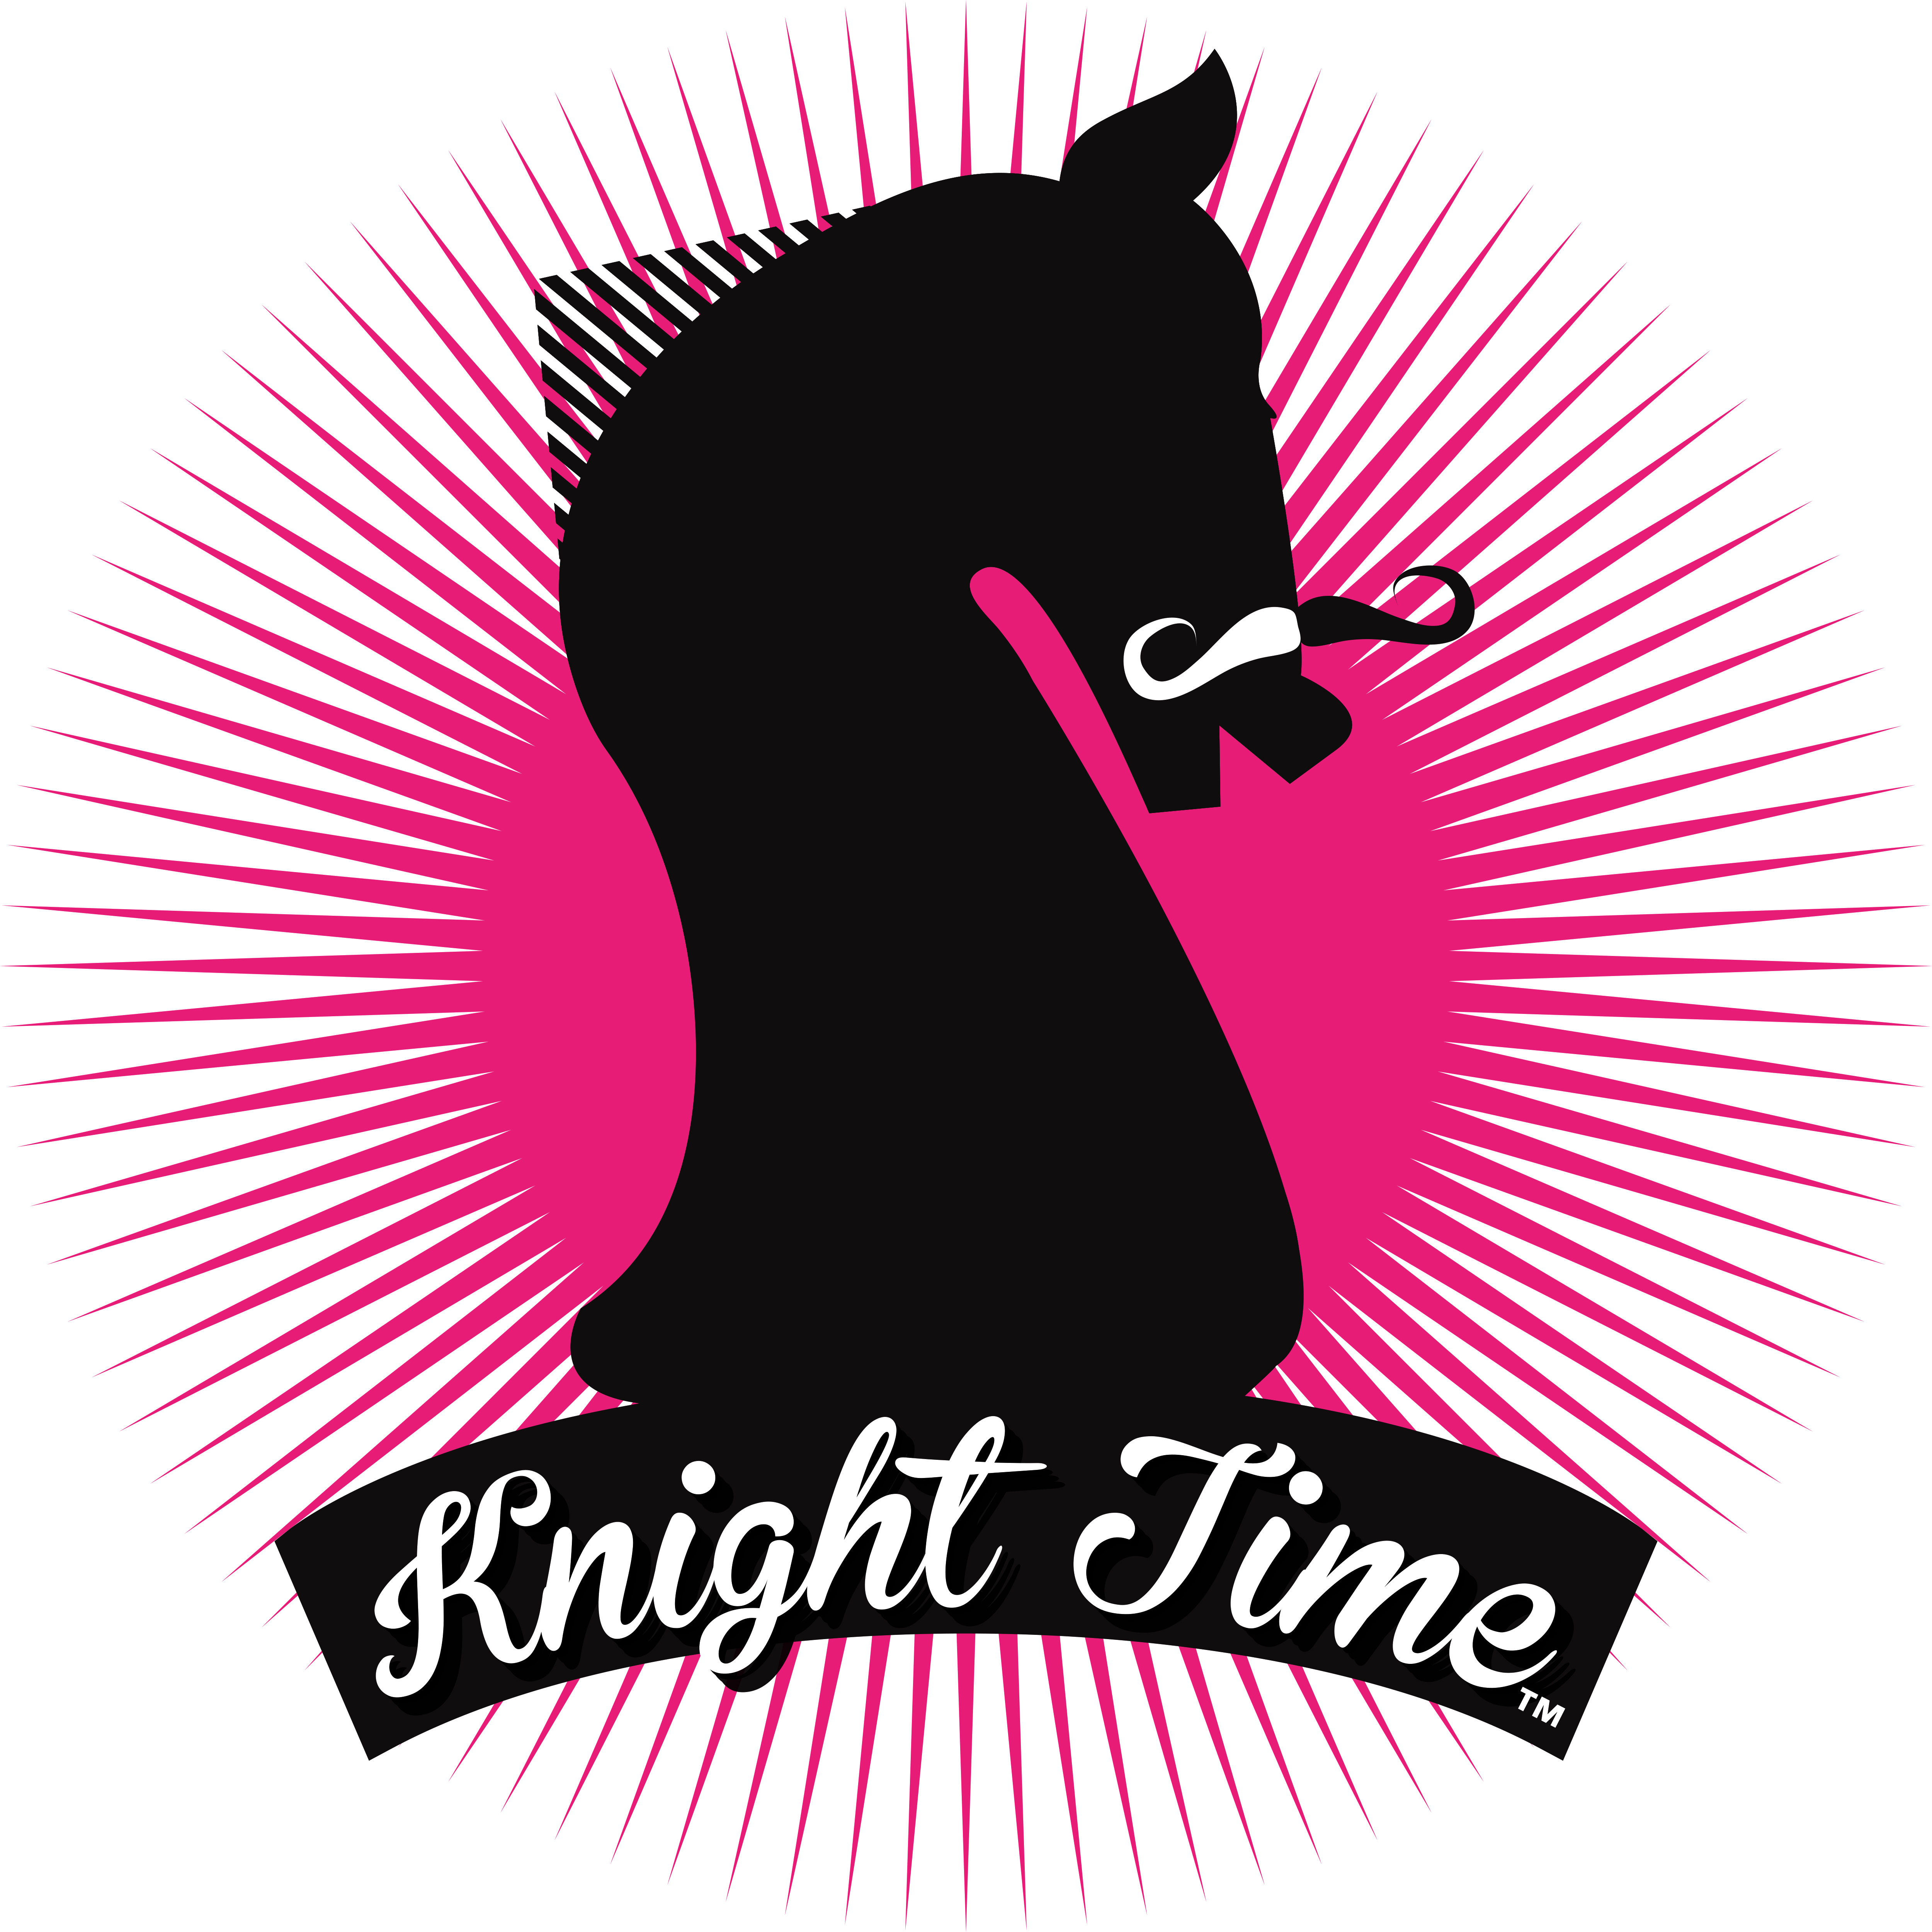 Knight Time is the Right Time: Introducing Knight Time Records!